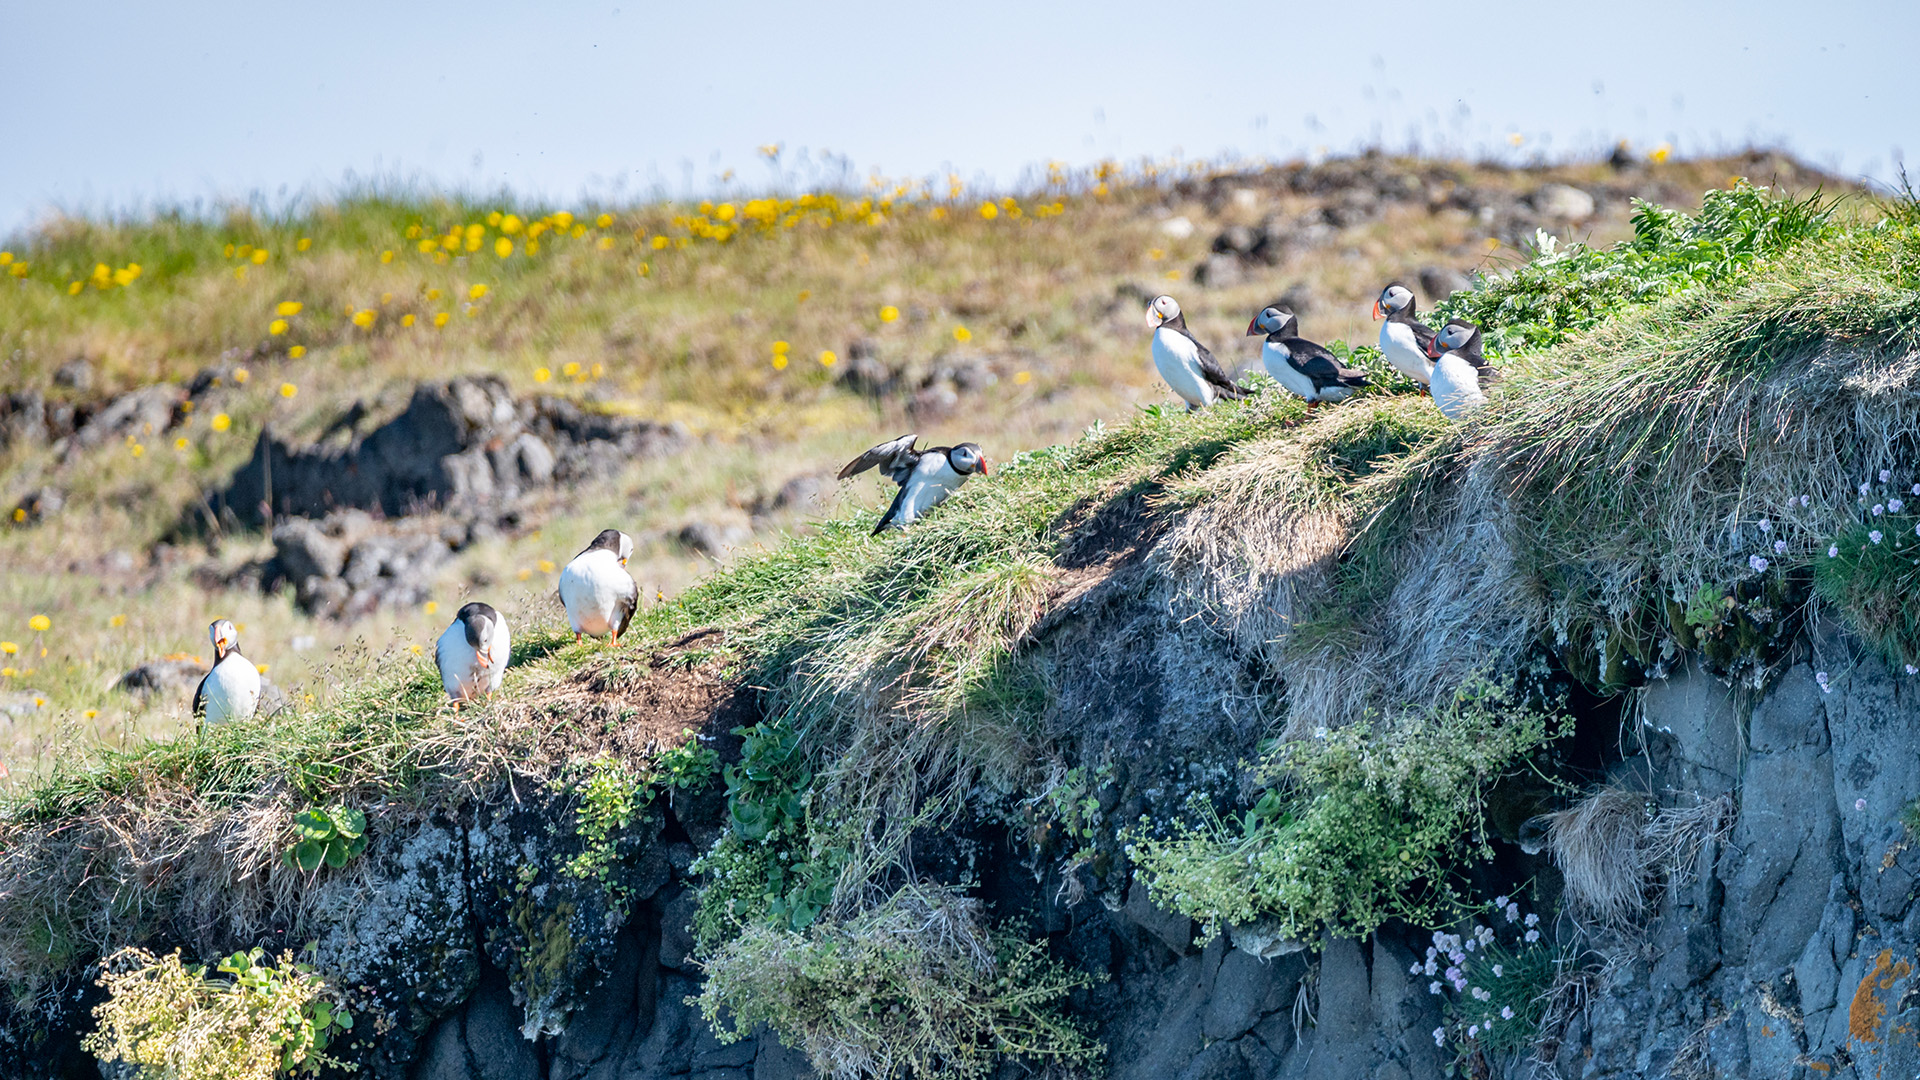 The island is a breeding ground for 100,000 Atlantic puffins. The steep hills and cliffs form the ideal “jump site” for clumsy and heavy puffins.